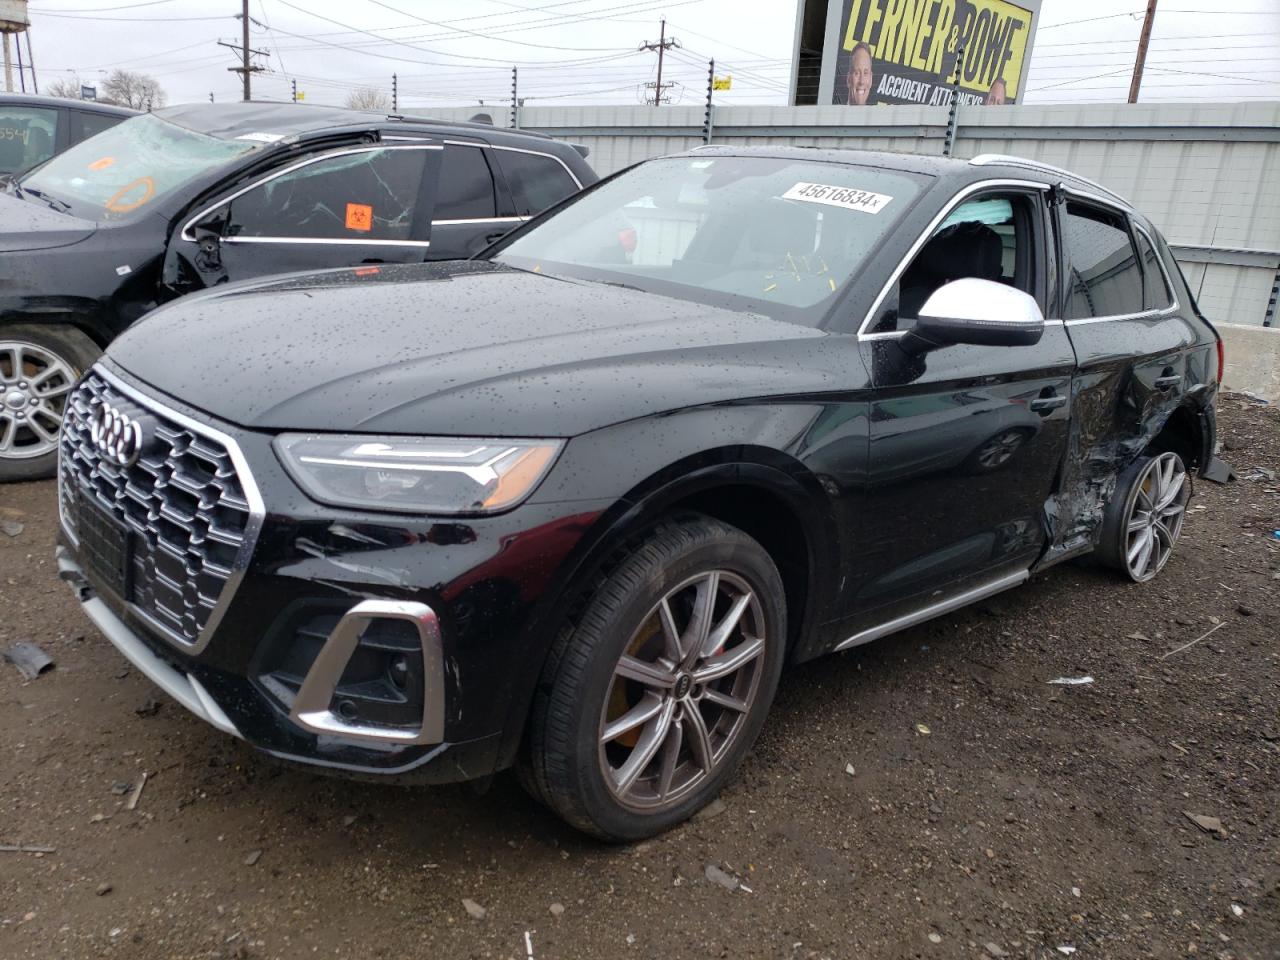 vin: WA1B4AFY4N2109549 WA1B4AFY4N2109549 2022 audi sq5 3000 for Sale in 60411 5546, Il - Chicago South, Chicago Heights, USA